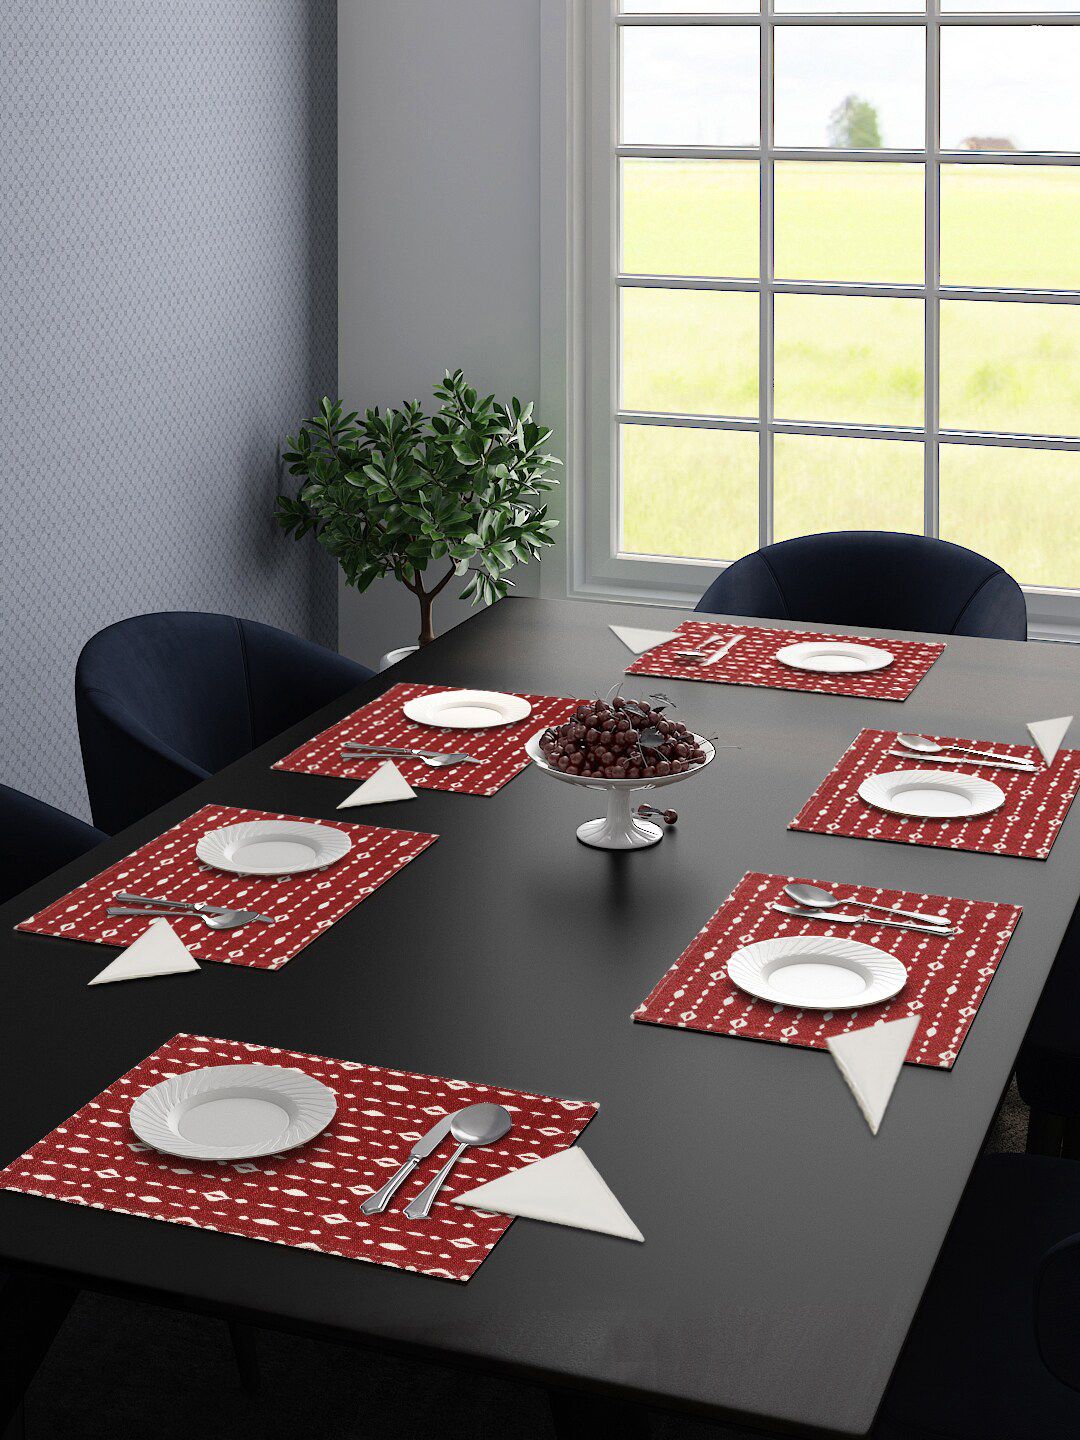 Saral Home Set Of 6 Red & White Geometric Woven Design Sustainable Table Placemats Price in India